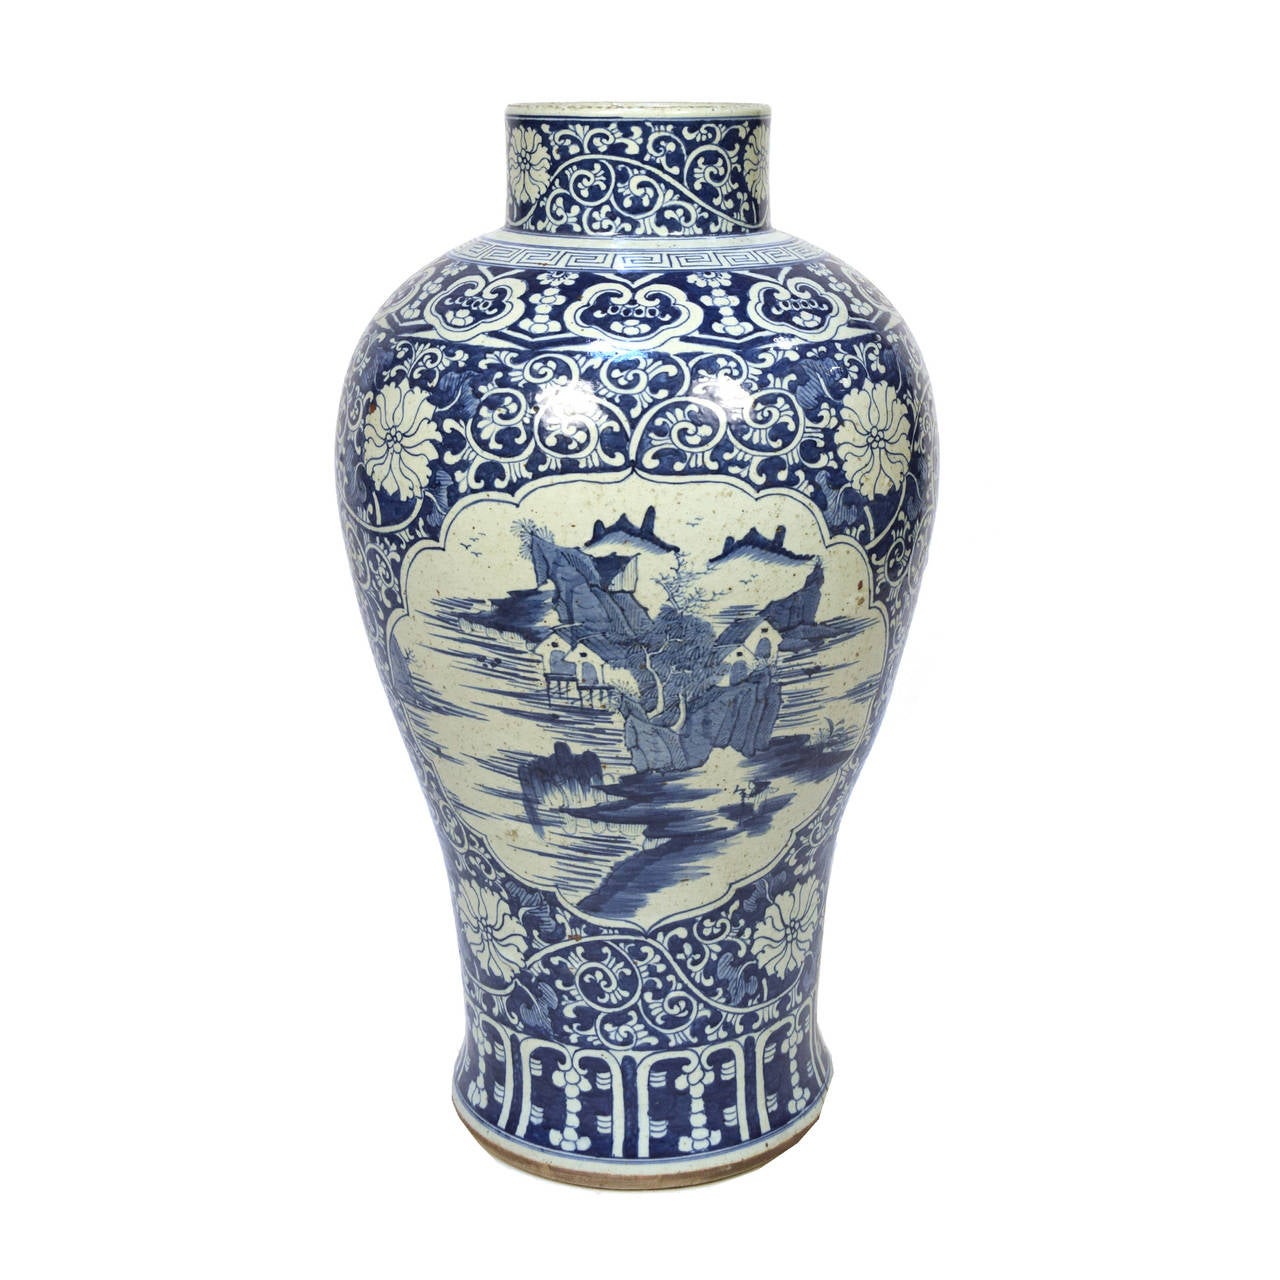 A pair of ceramic monumental blue and white vases from Beijing, China painted with a landscape scene surrounded by a floral vine motif.

          